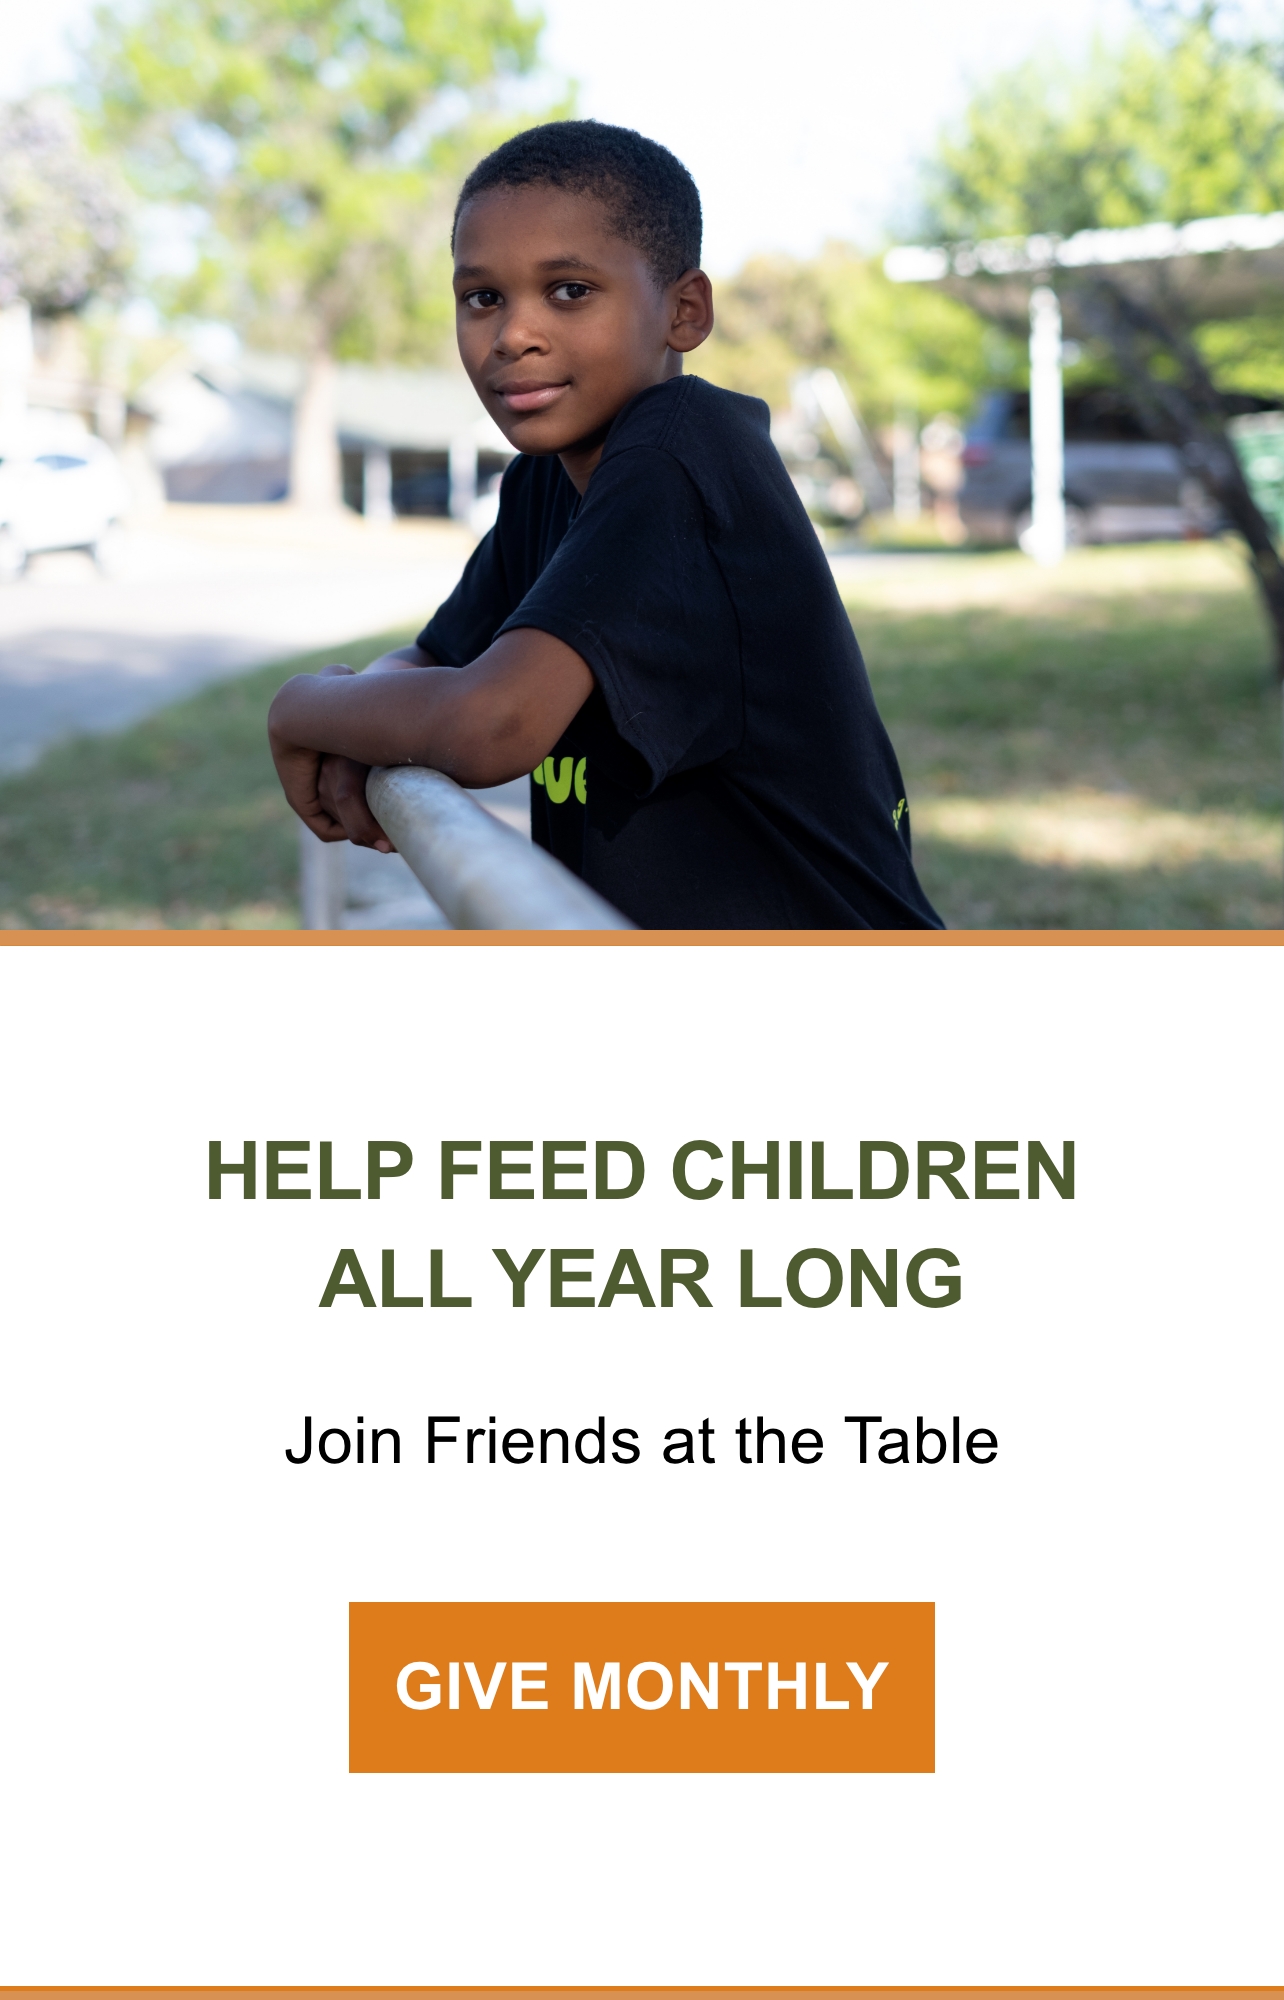 HELP FEED CHILDREN ALL YEAR LONG